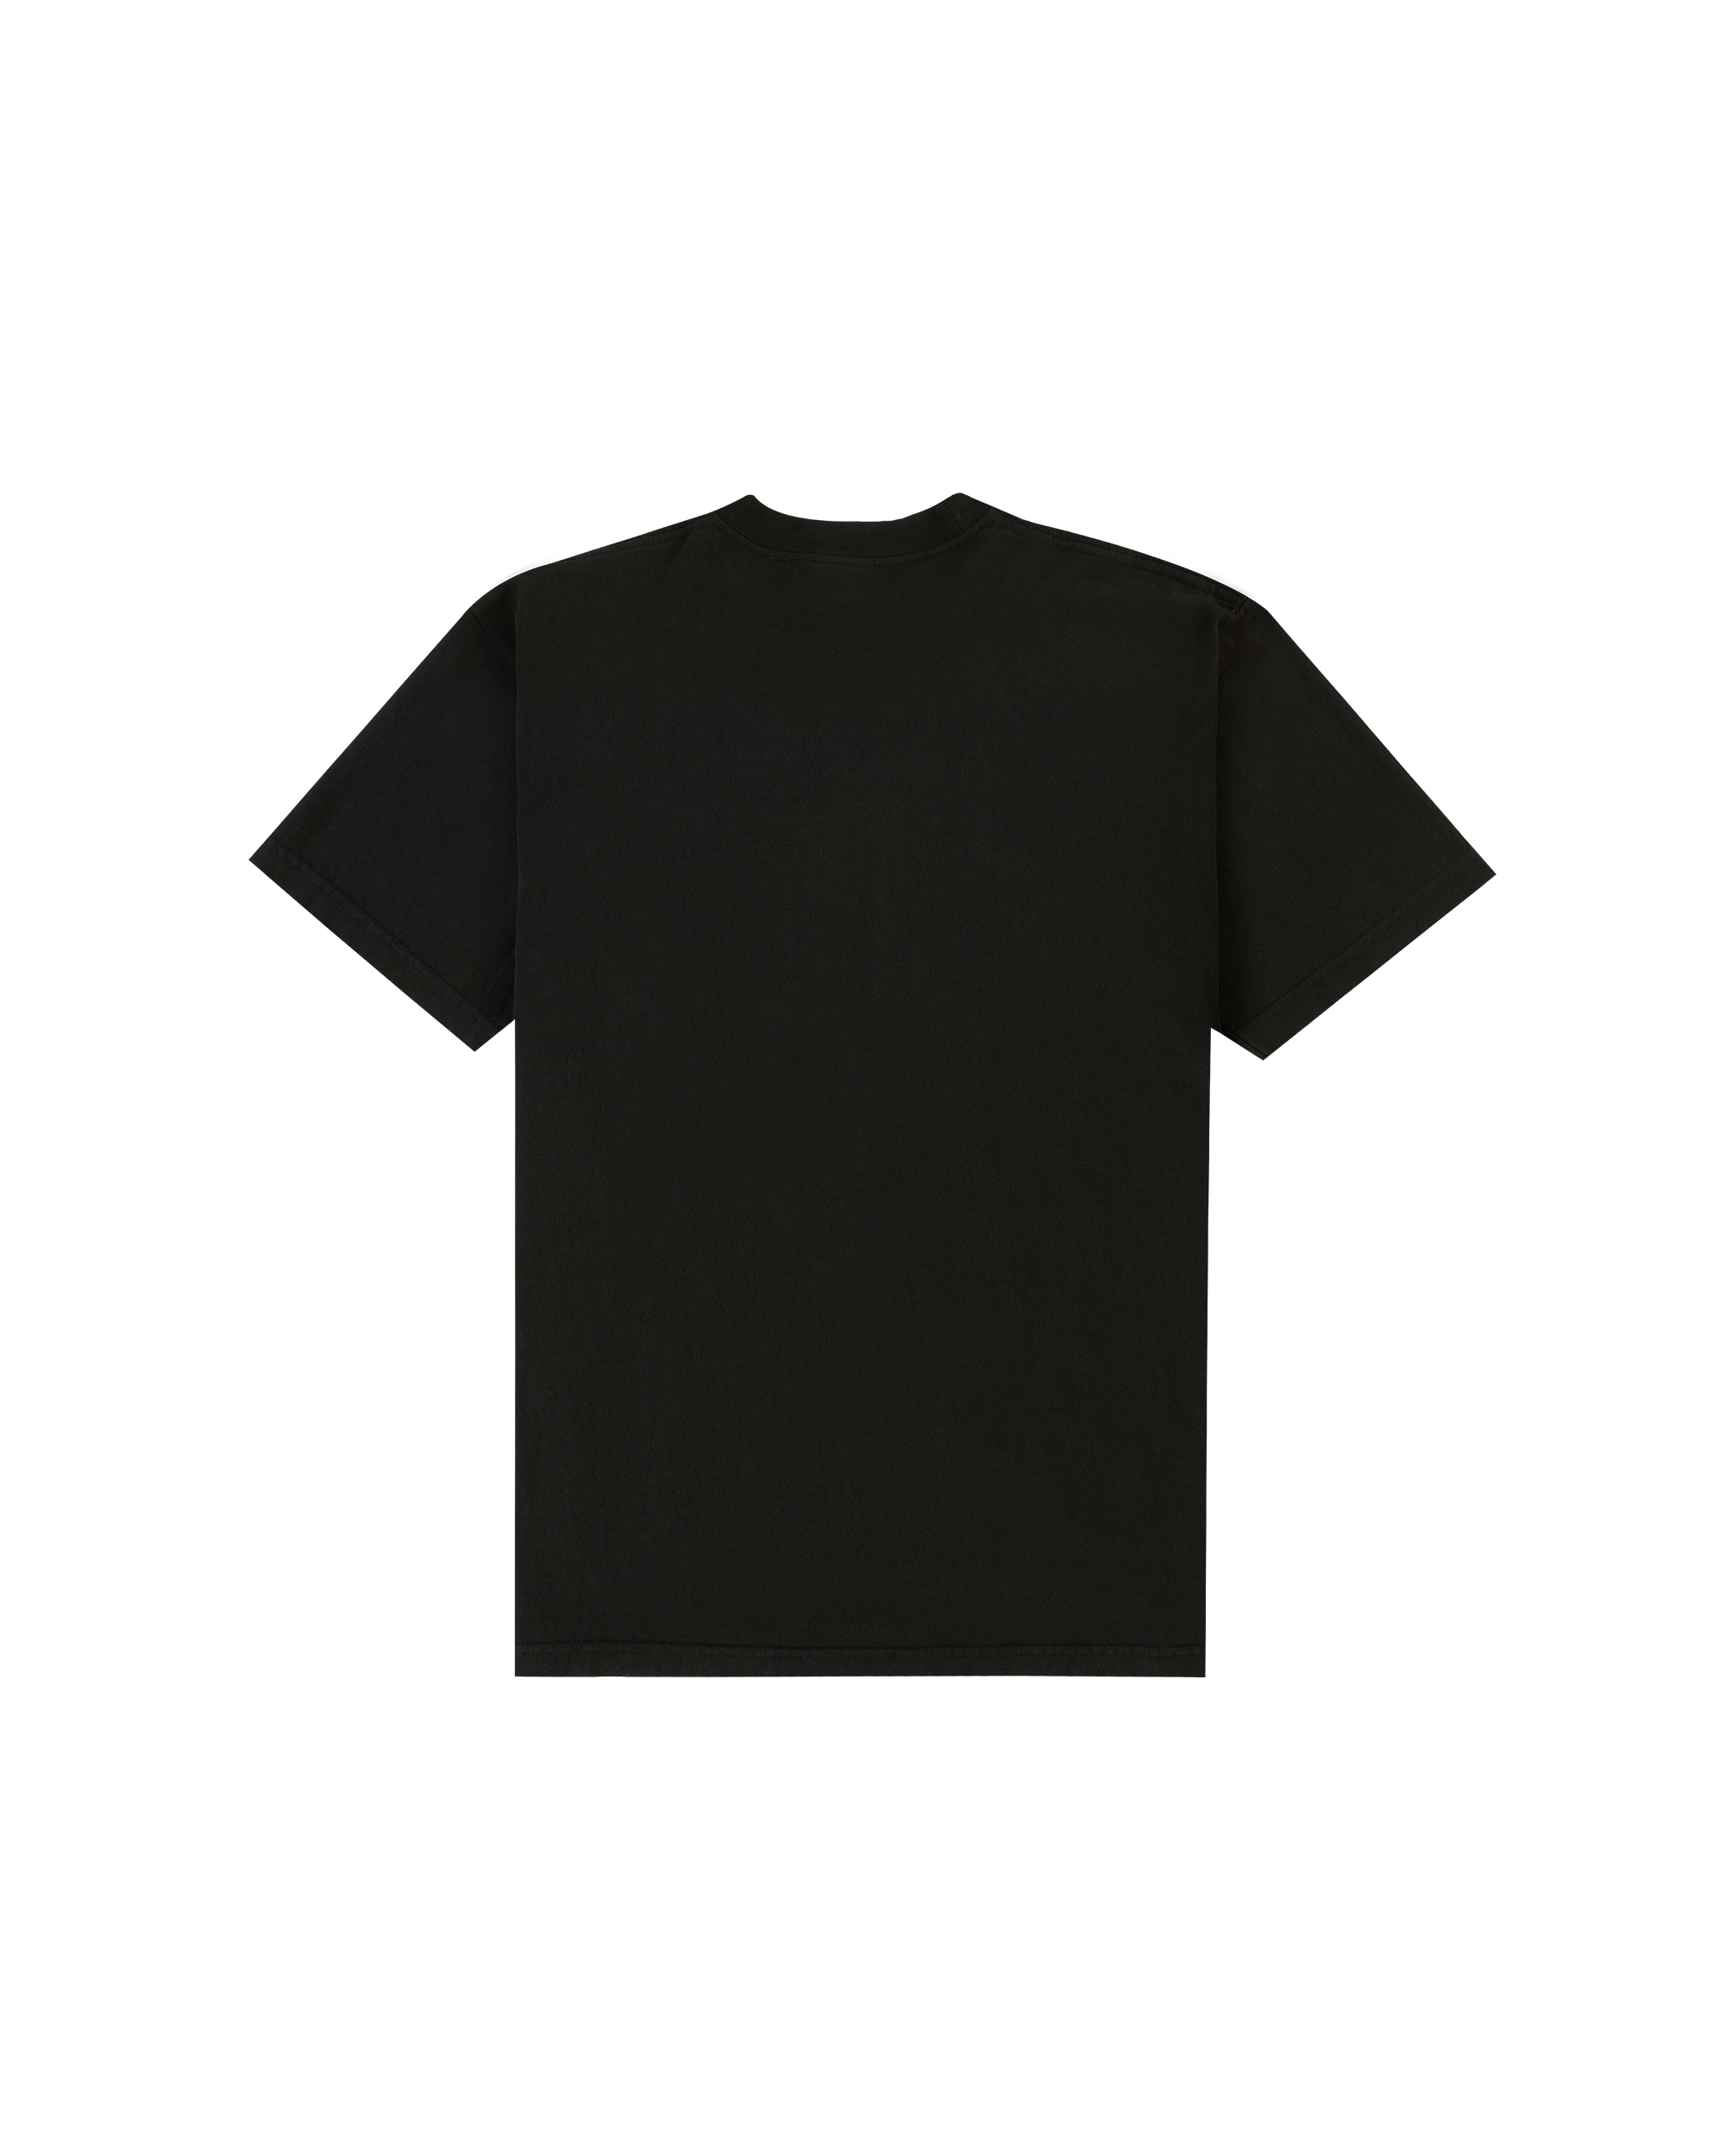 Peggys Therapy T-Shirt - Black